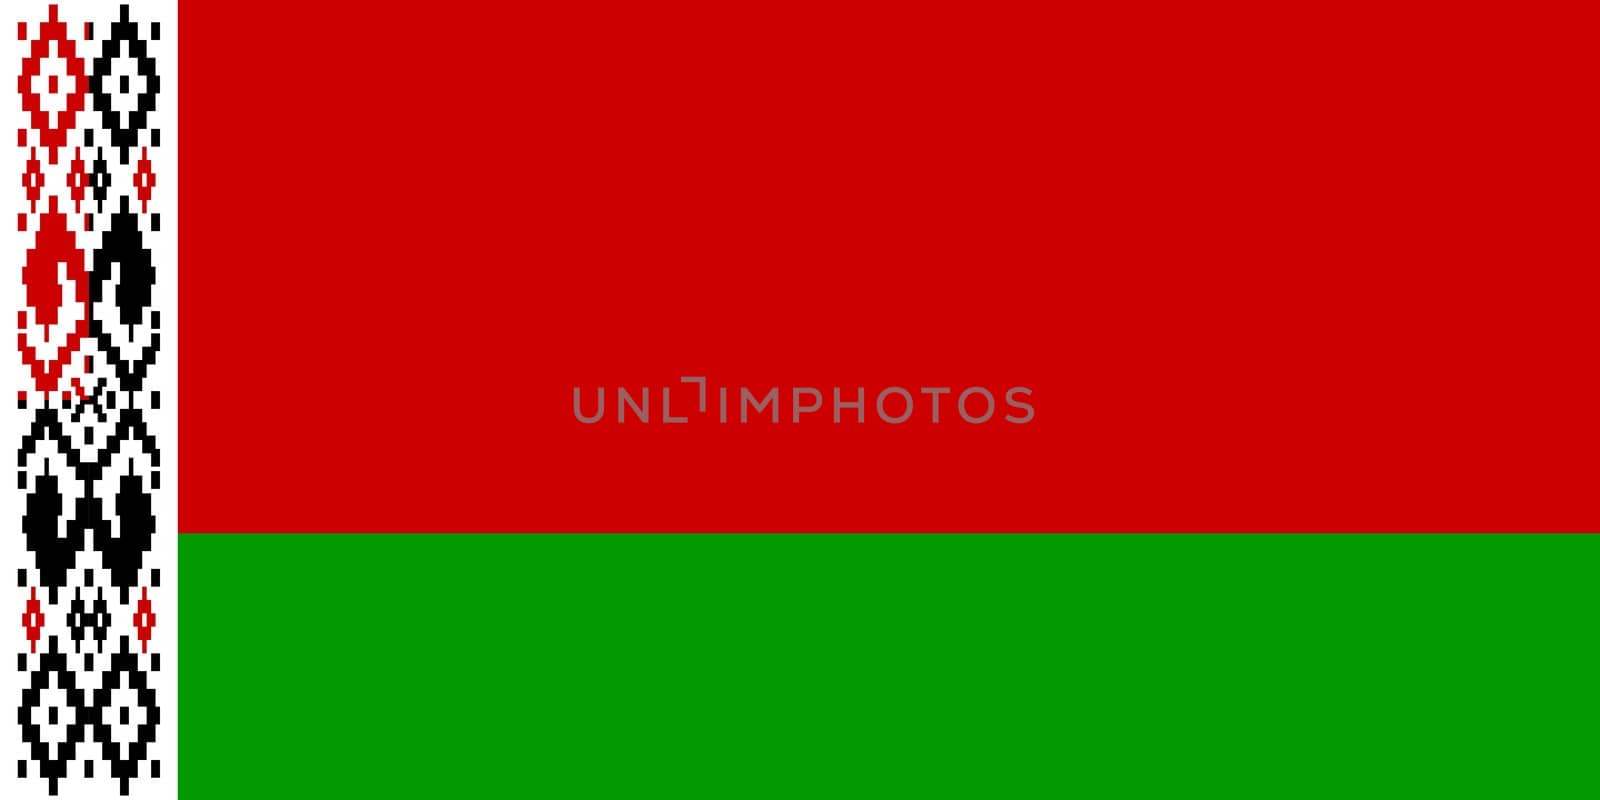 The national flag of Belarus by claudiodivizia